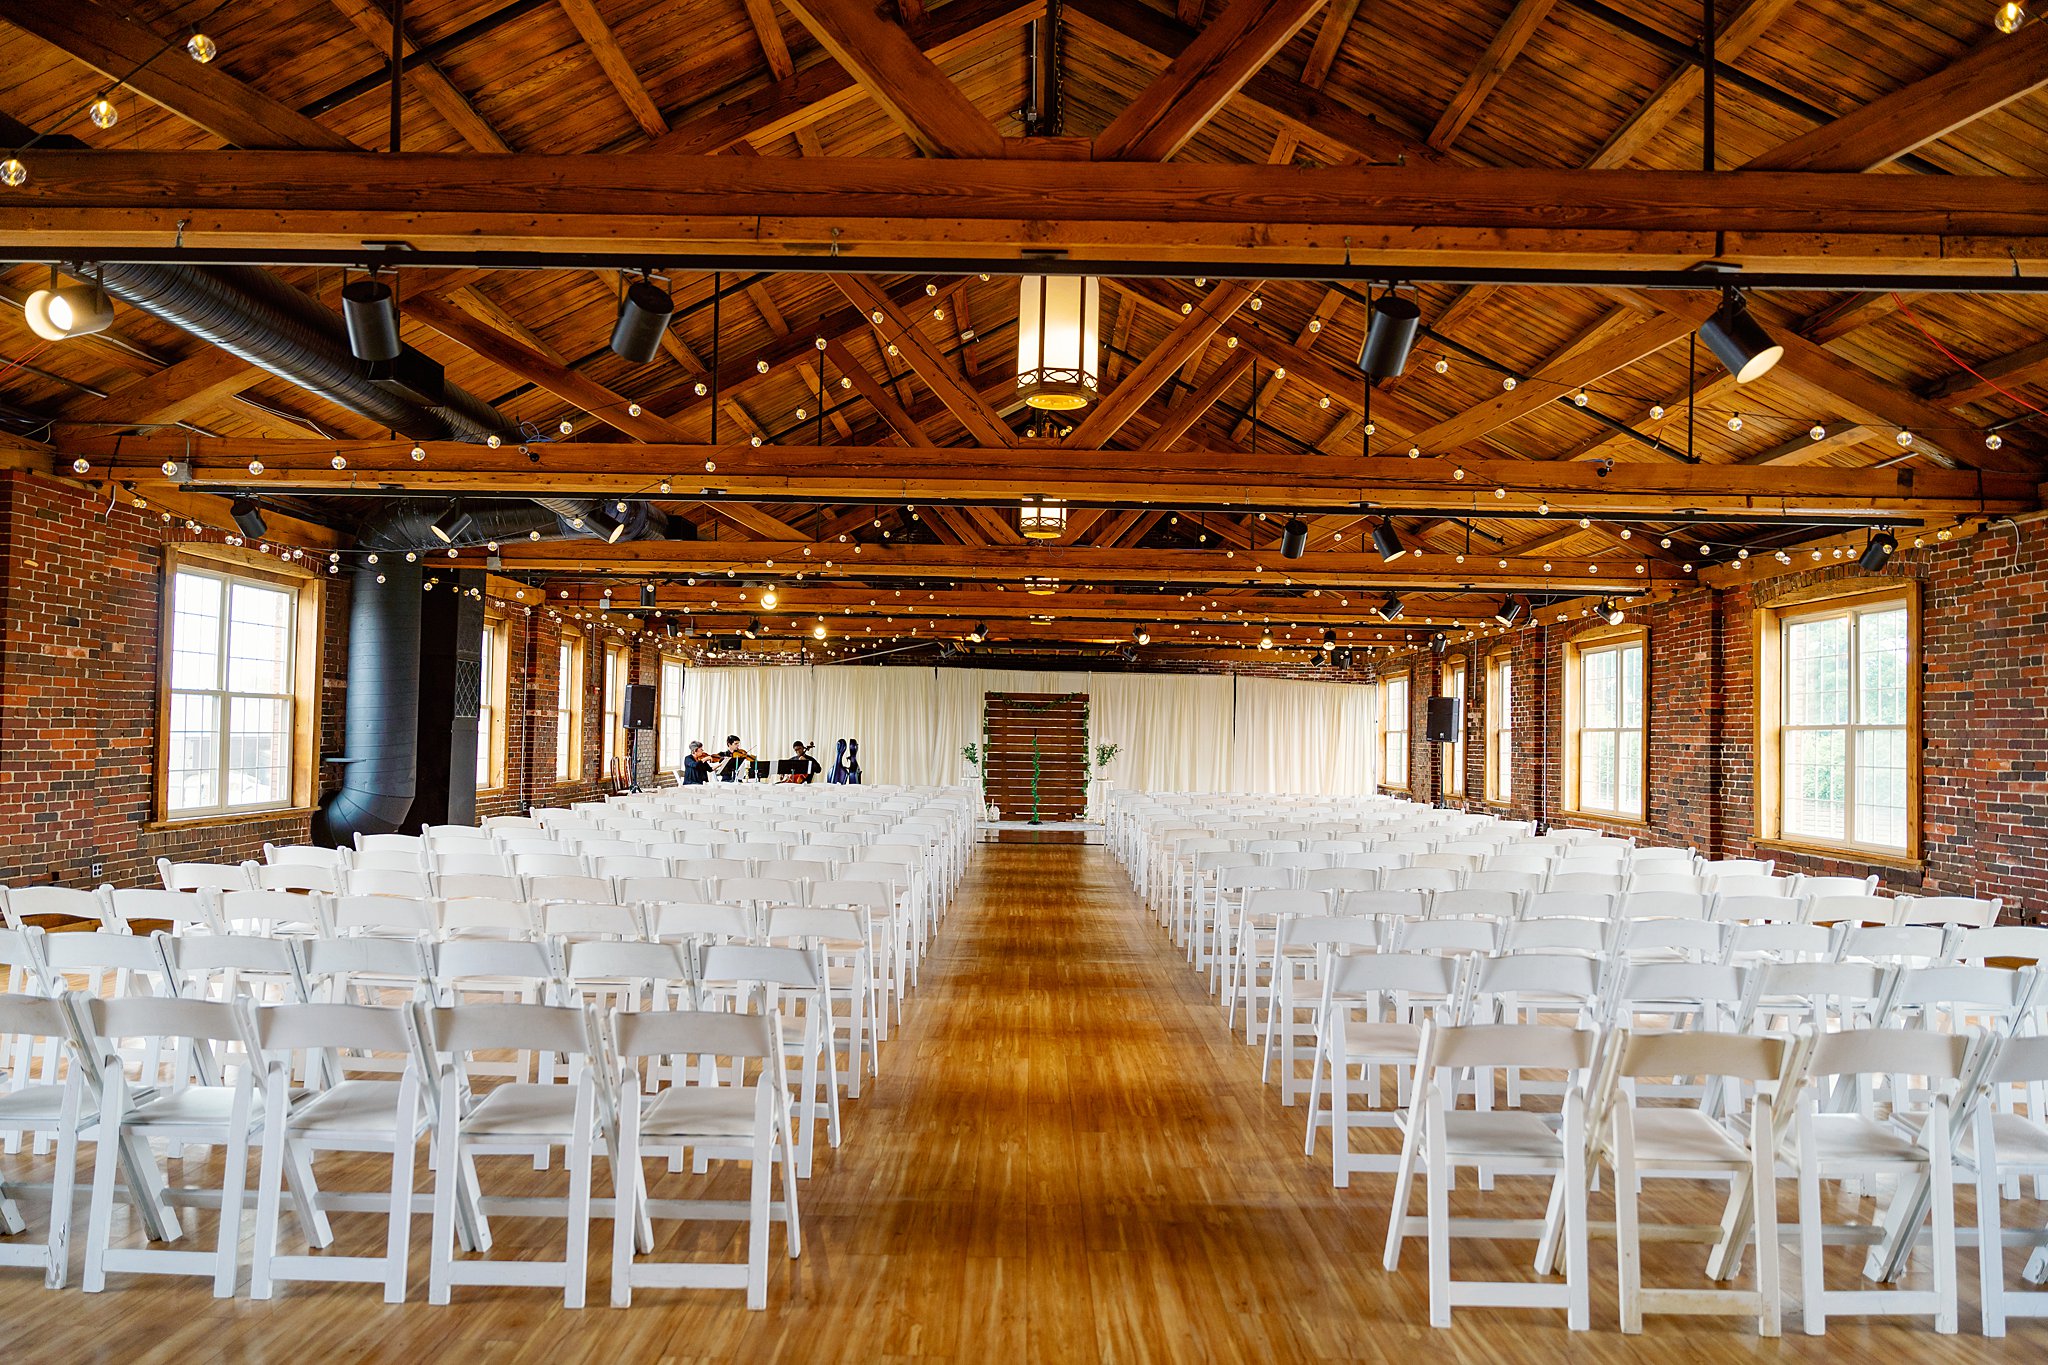 A large barn setup for a wedding ceremony with market lights and white chairs unique wedding venues dayton ohio